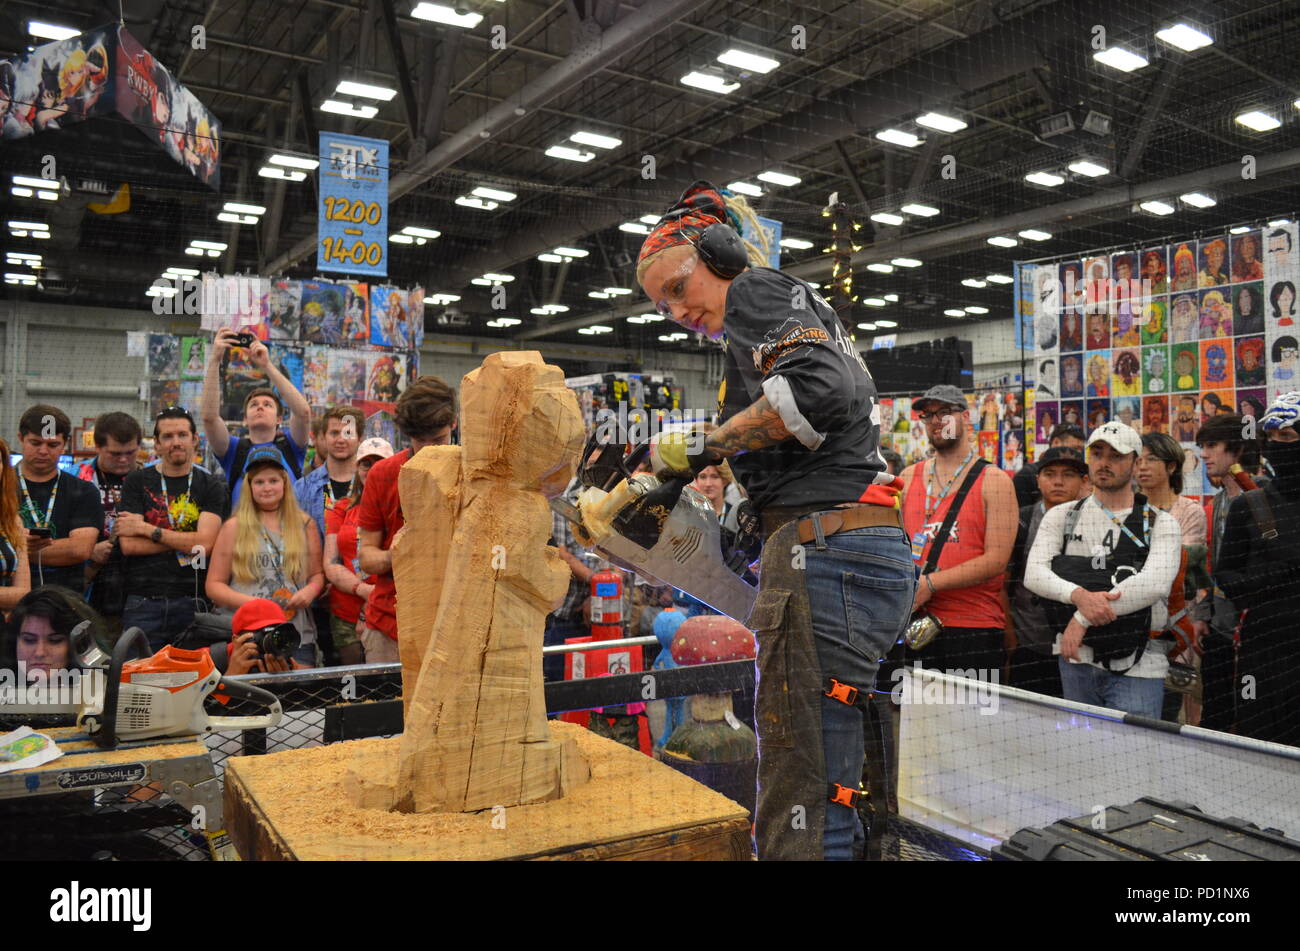 Austin, Texas, USA - Champion speed carver and chainsaw artist, Griffon,  demonstrates her talent for the crowd. Tens of thousands of fans gather for  RTX Austin, an annual gaming and Internet conventions